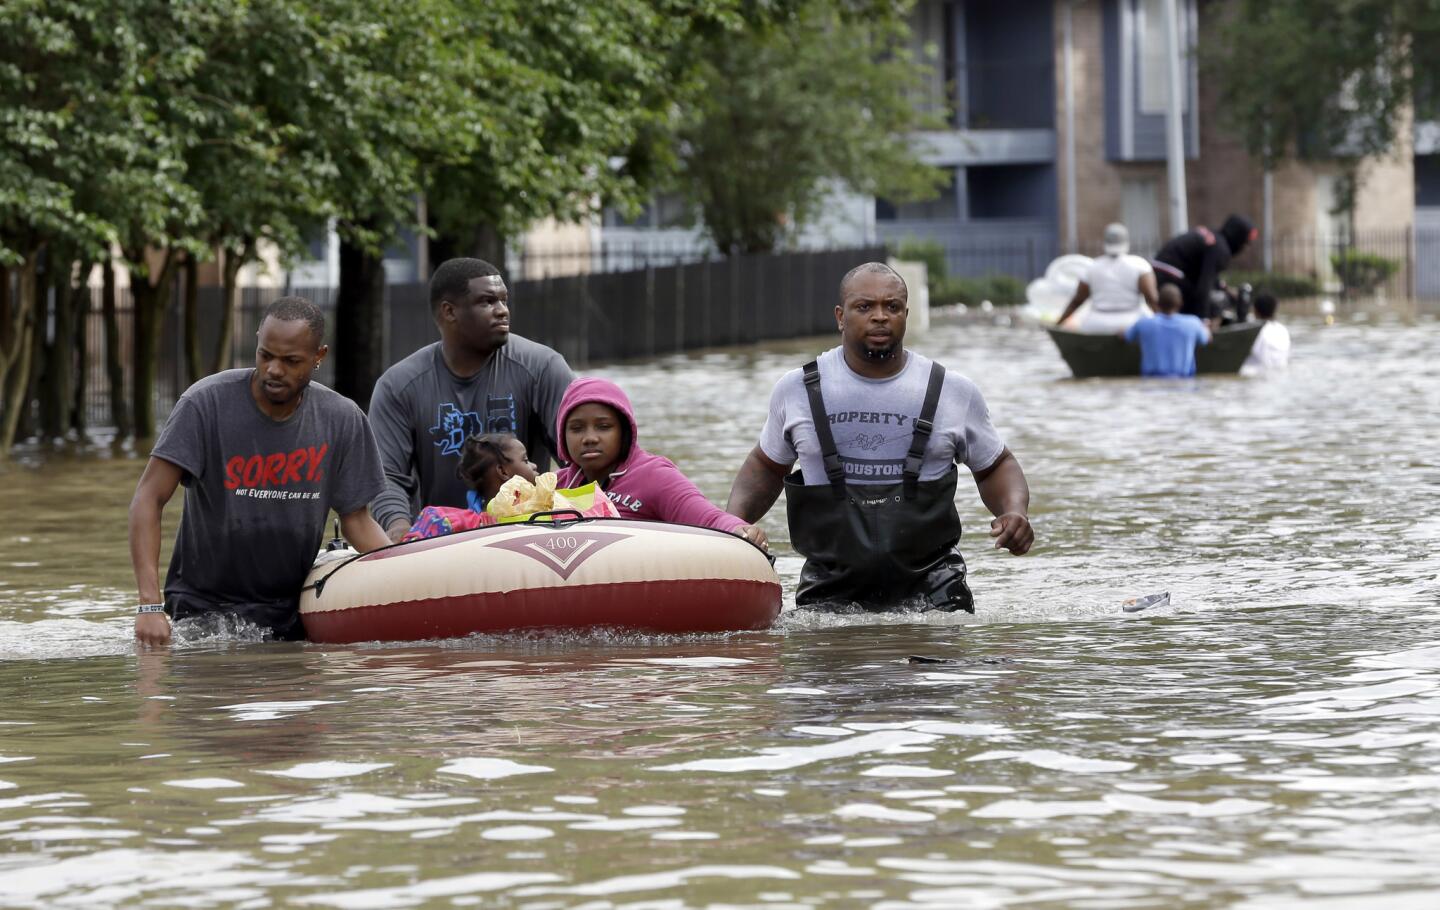 Residents are evacuated from their apartment complex surrounded by floodwaters in Houston. Storms have dumped more than a foot of rain in the Houston area, flooding dozens of neighborhoods and forcing the closure of city offices and the suspension of public transit.